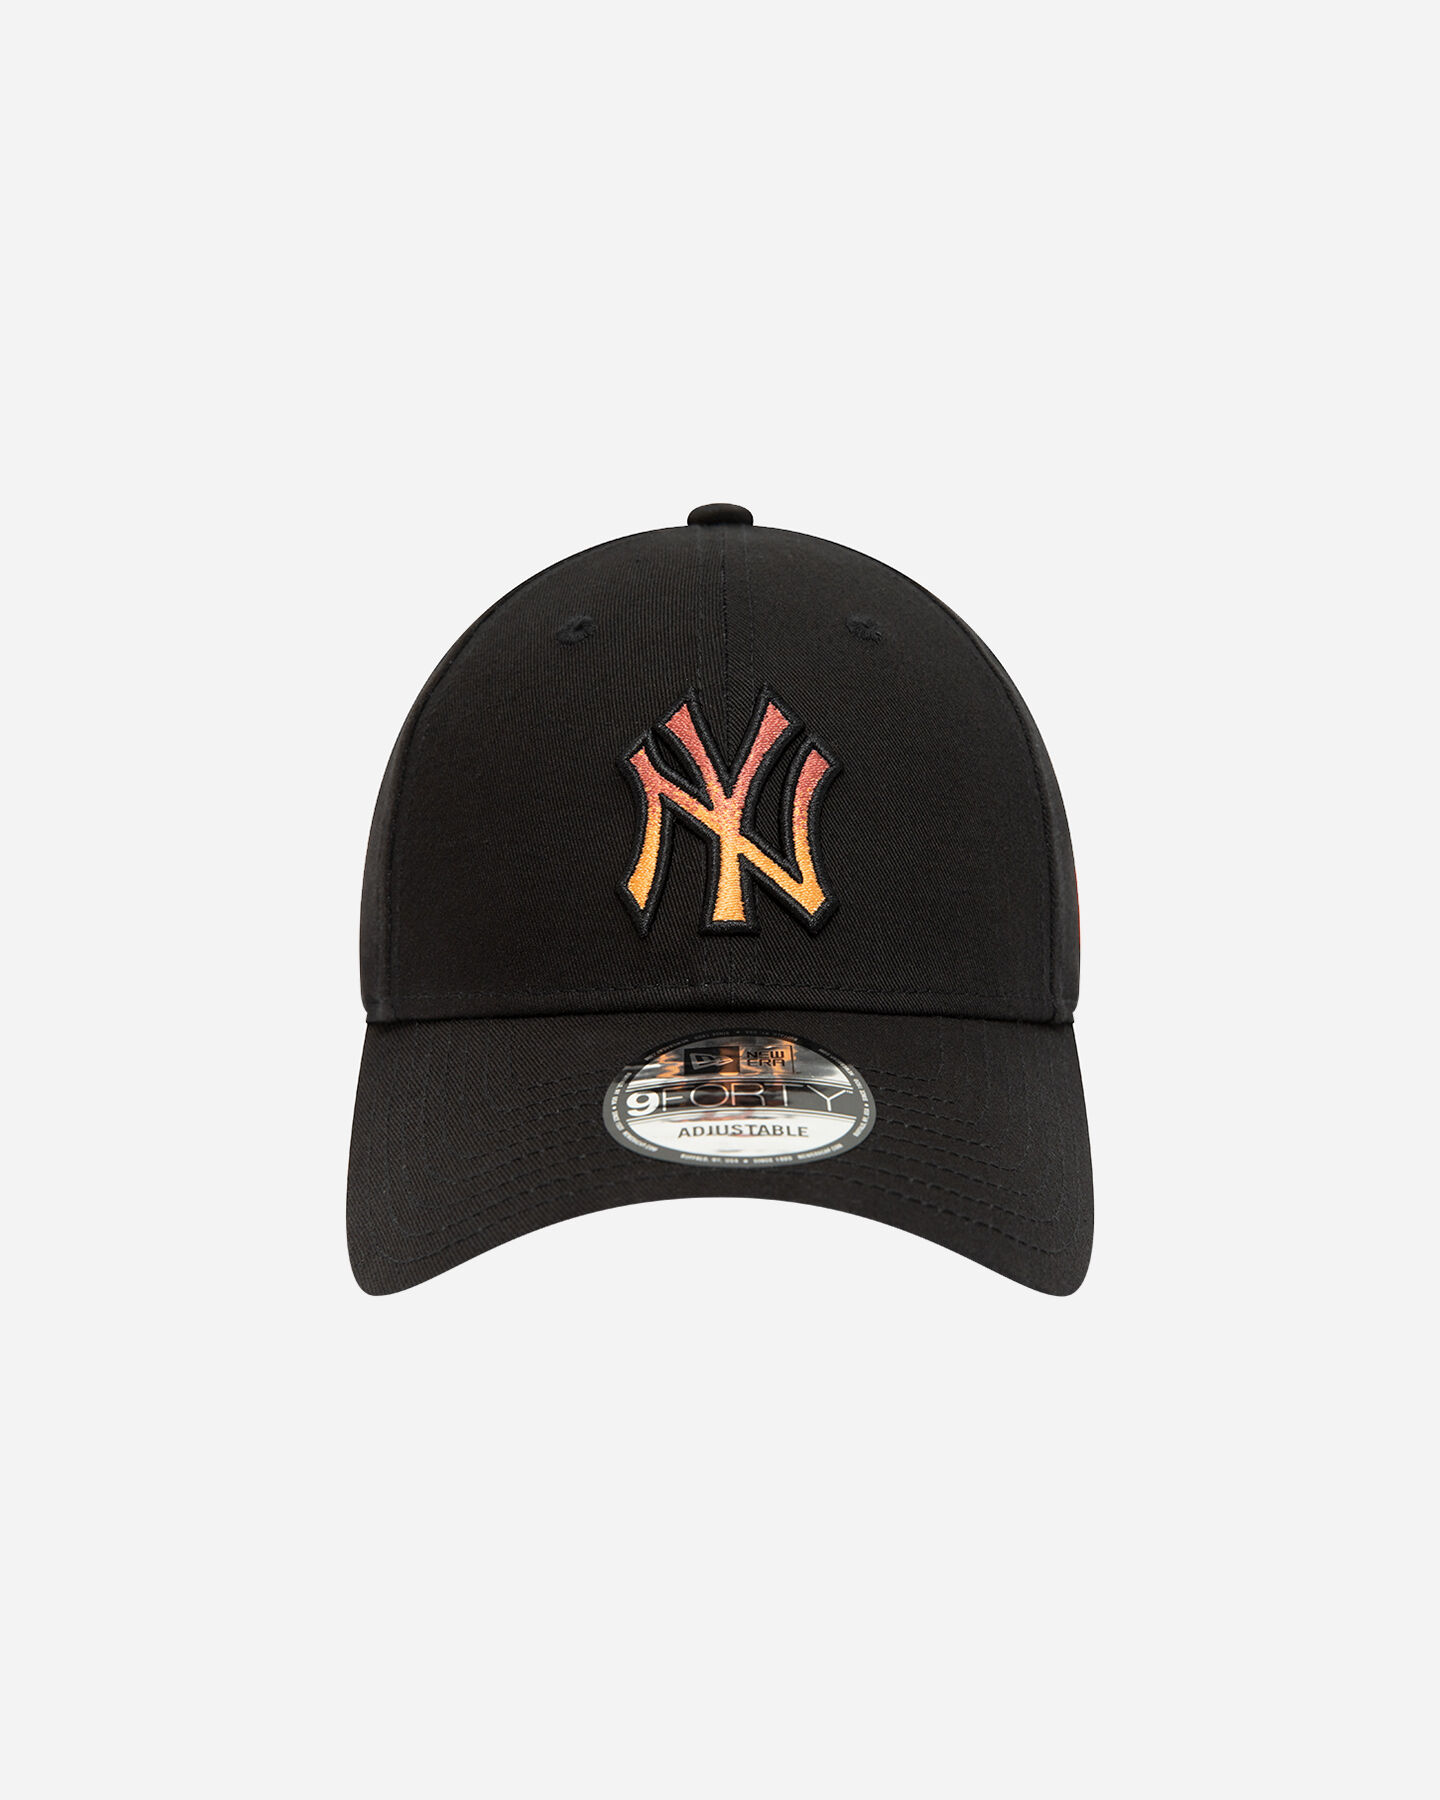  Cappellino NEW ERA 9FORTY INFILL NY YANKEES  S5546154|001|OSFM scatto 1